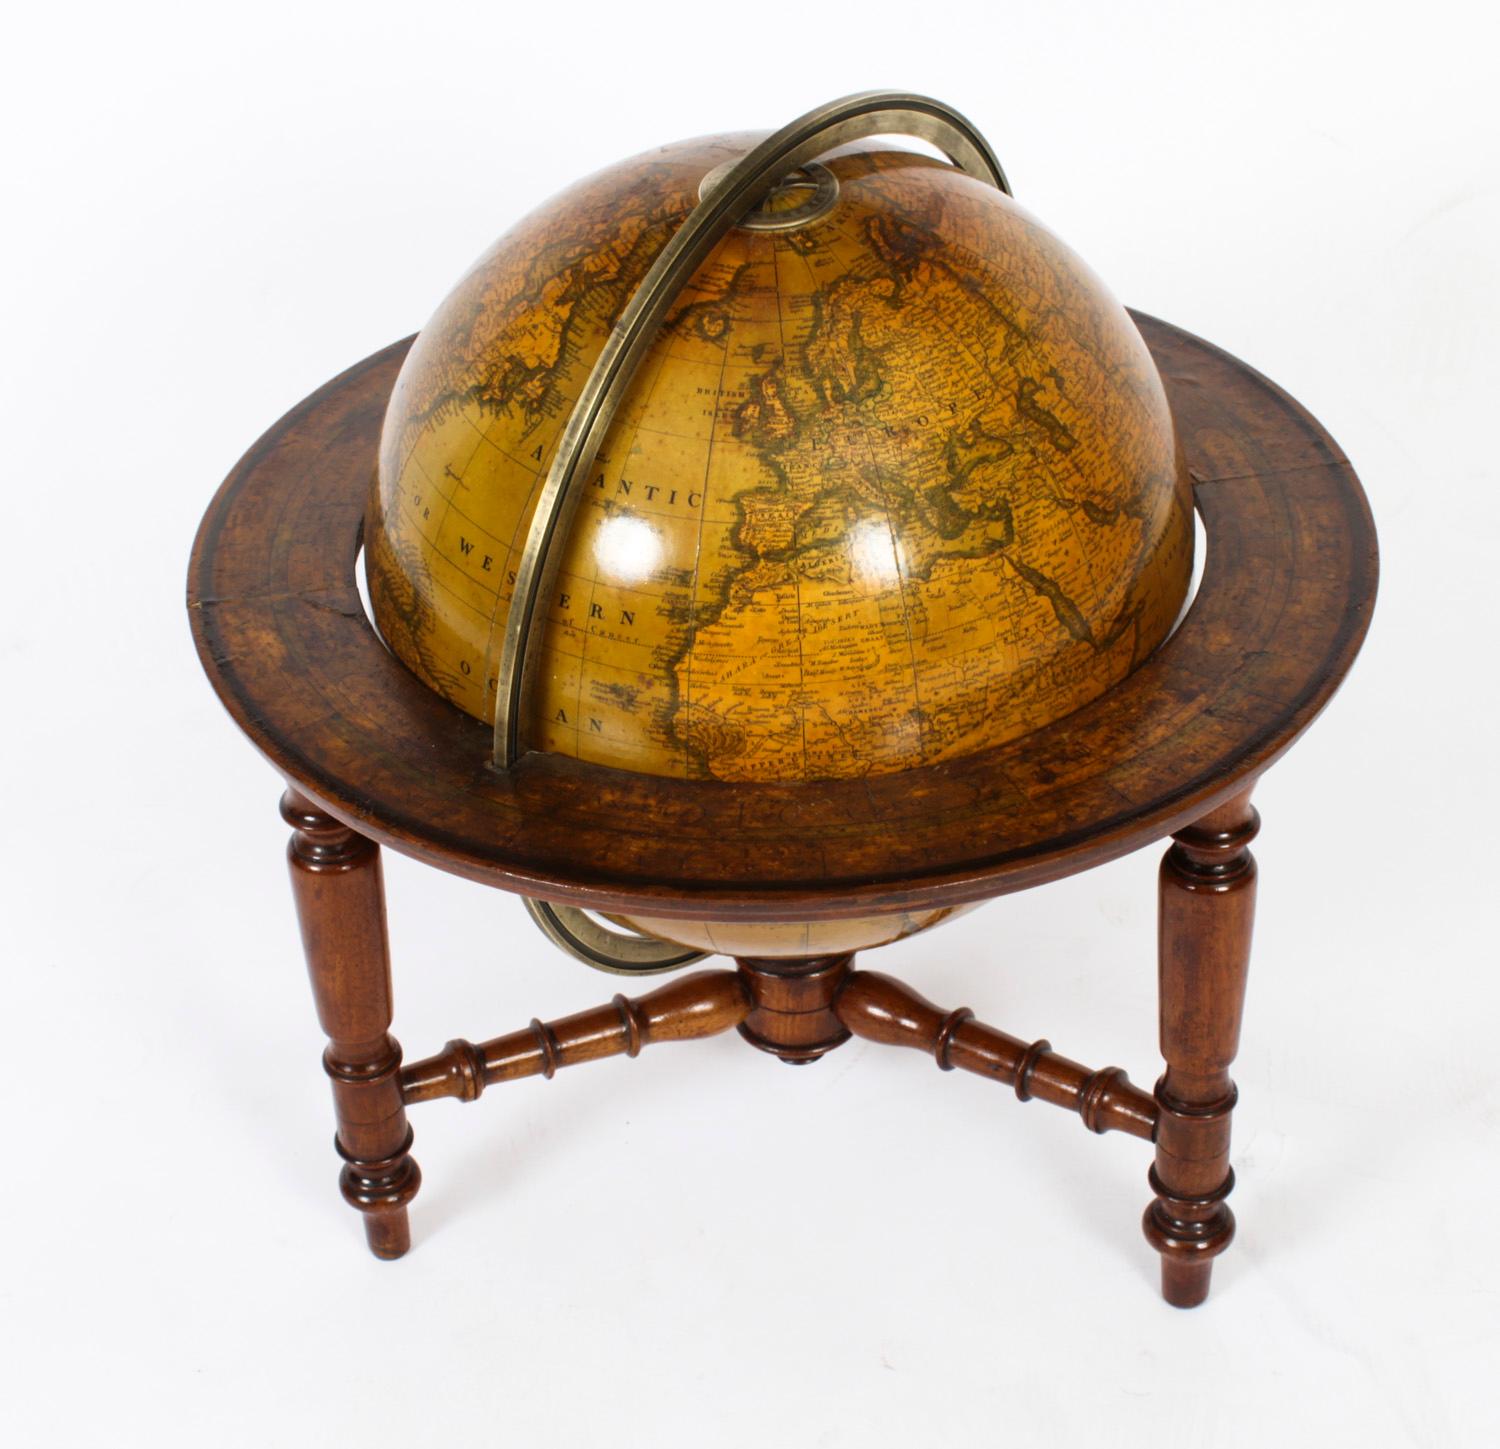 A fine antique Victorian terrestrial 'Cruchley's Late Cary's New Terrestrial' 12-inch table globe, dated 1855.
 
The globe is fitted with a brass meridian ring, a horizon ring with printed months of the year and astrological signs, mounted on a